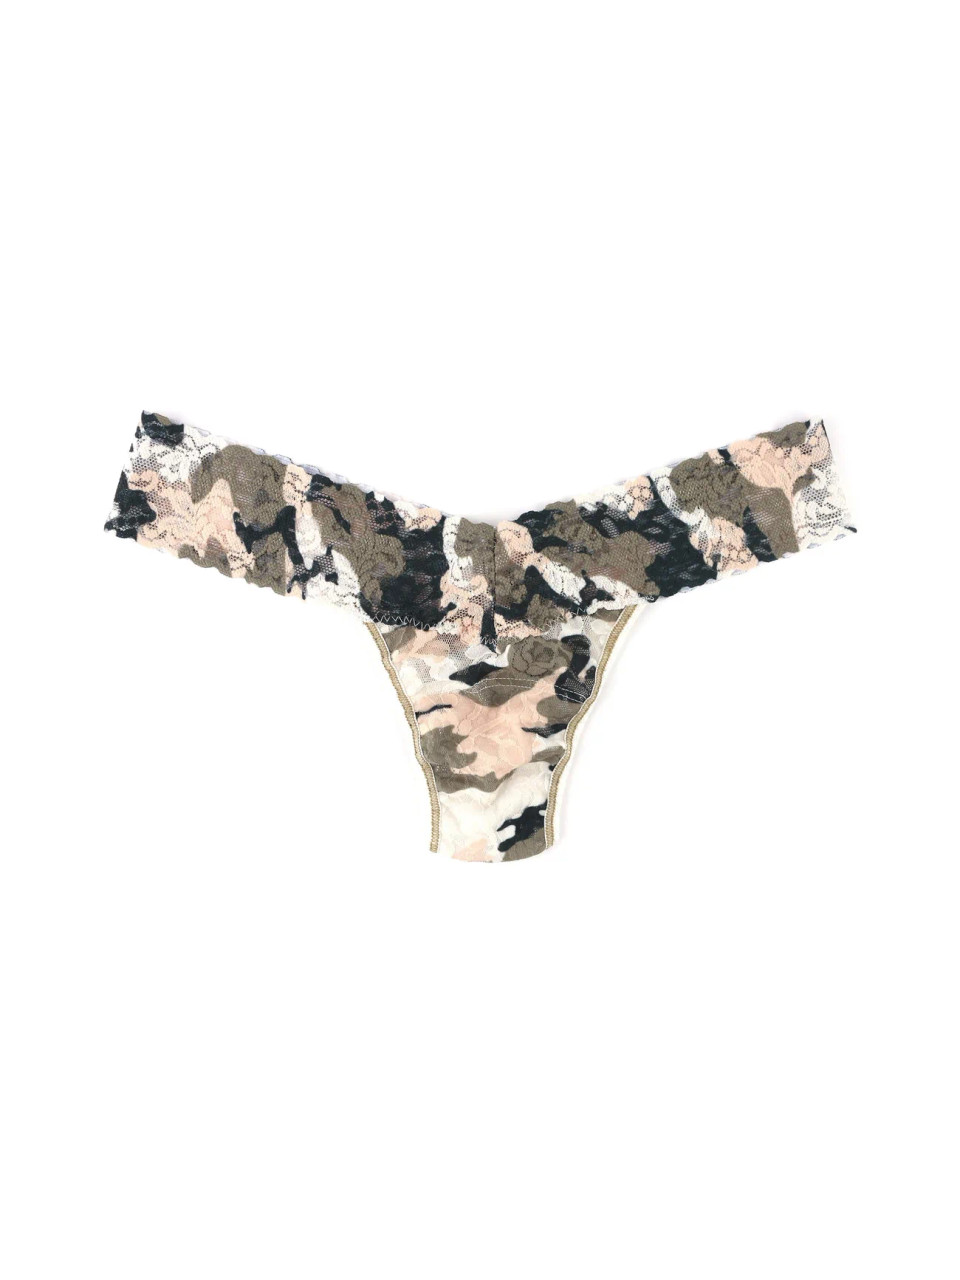 SALE Printed Signature Lace Low Rise Thong